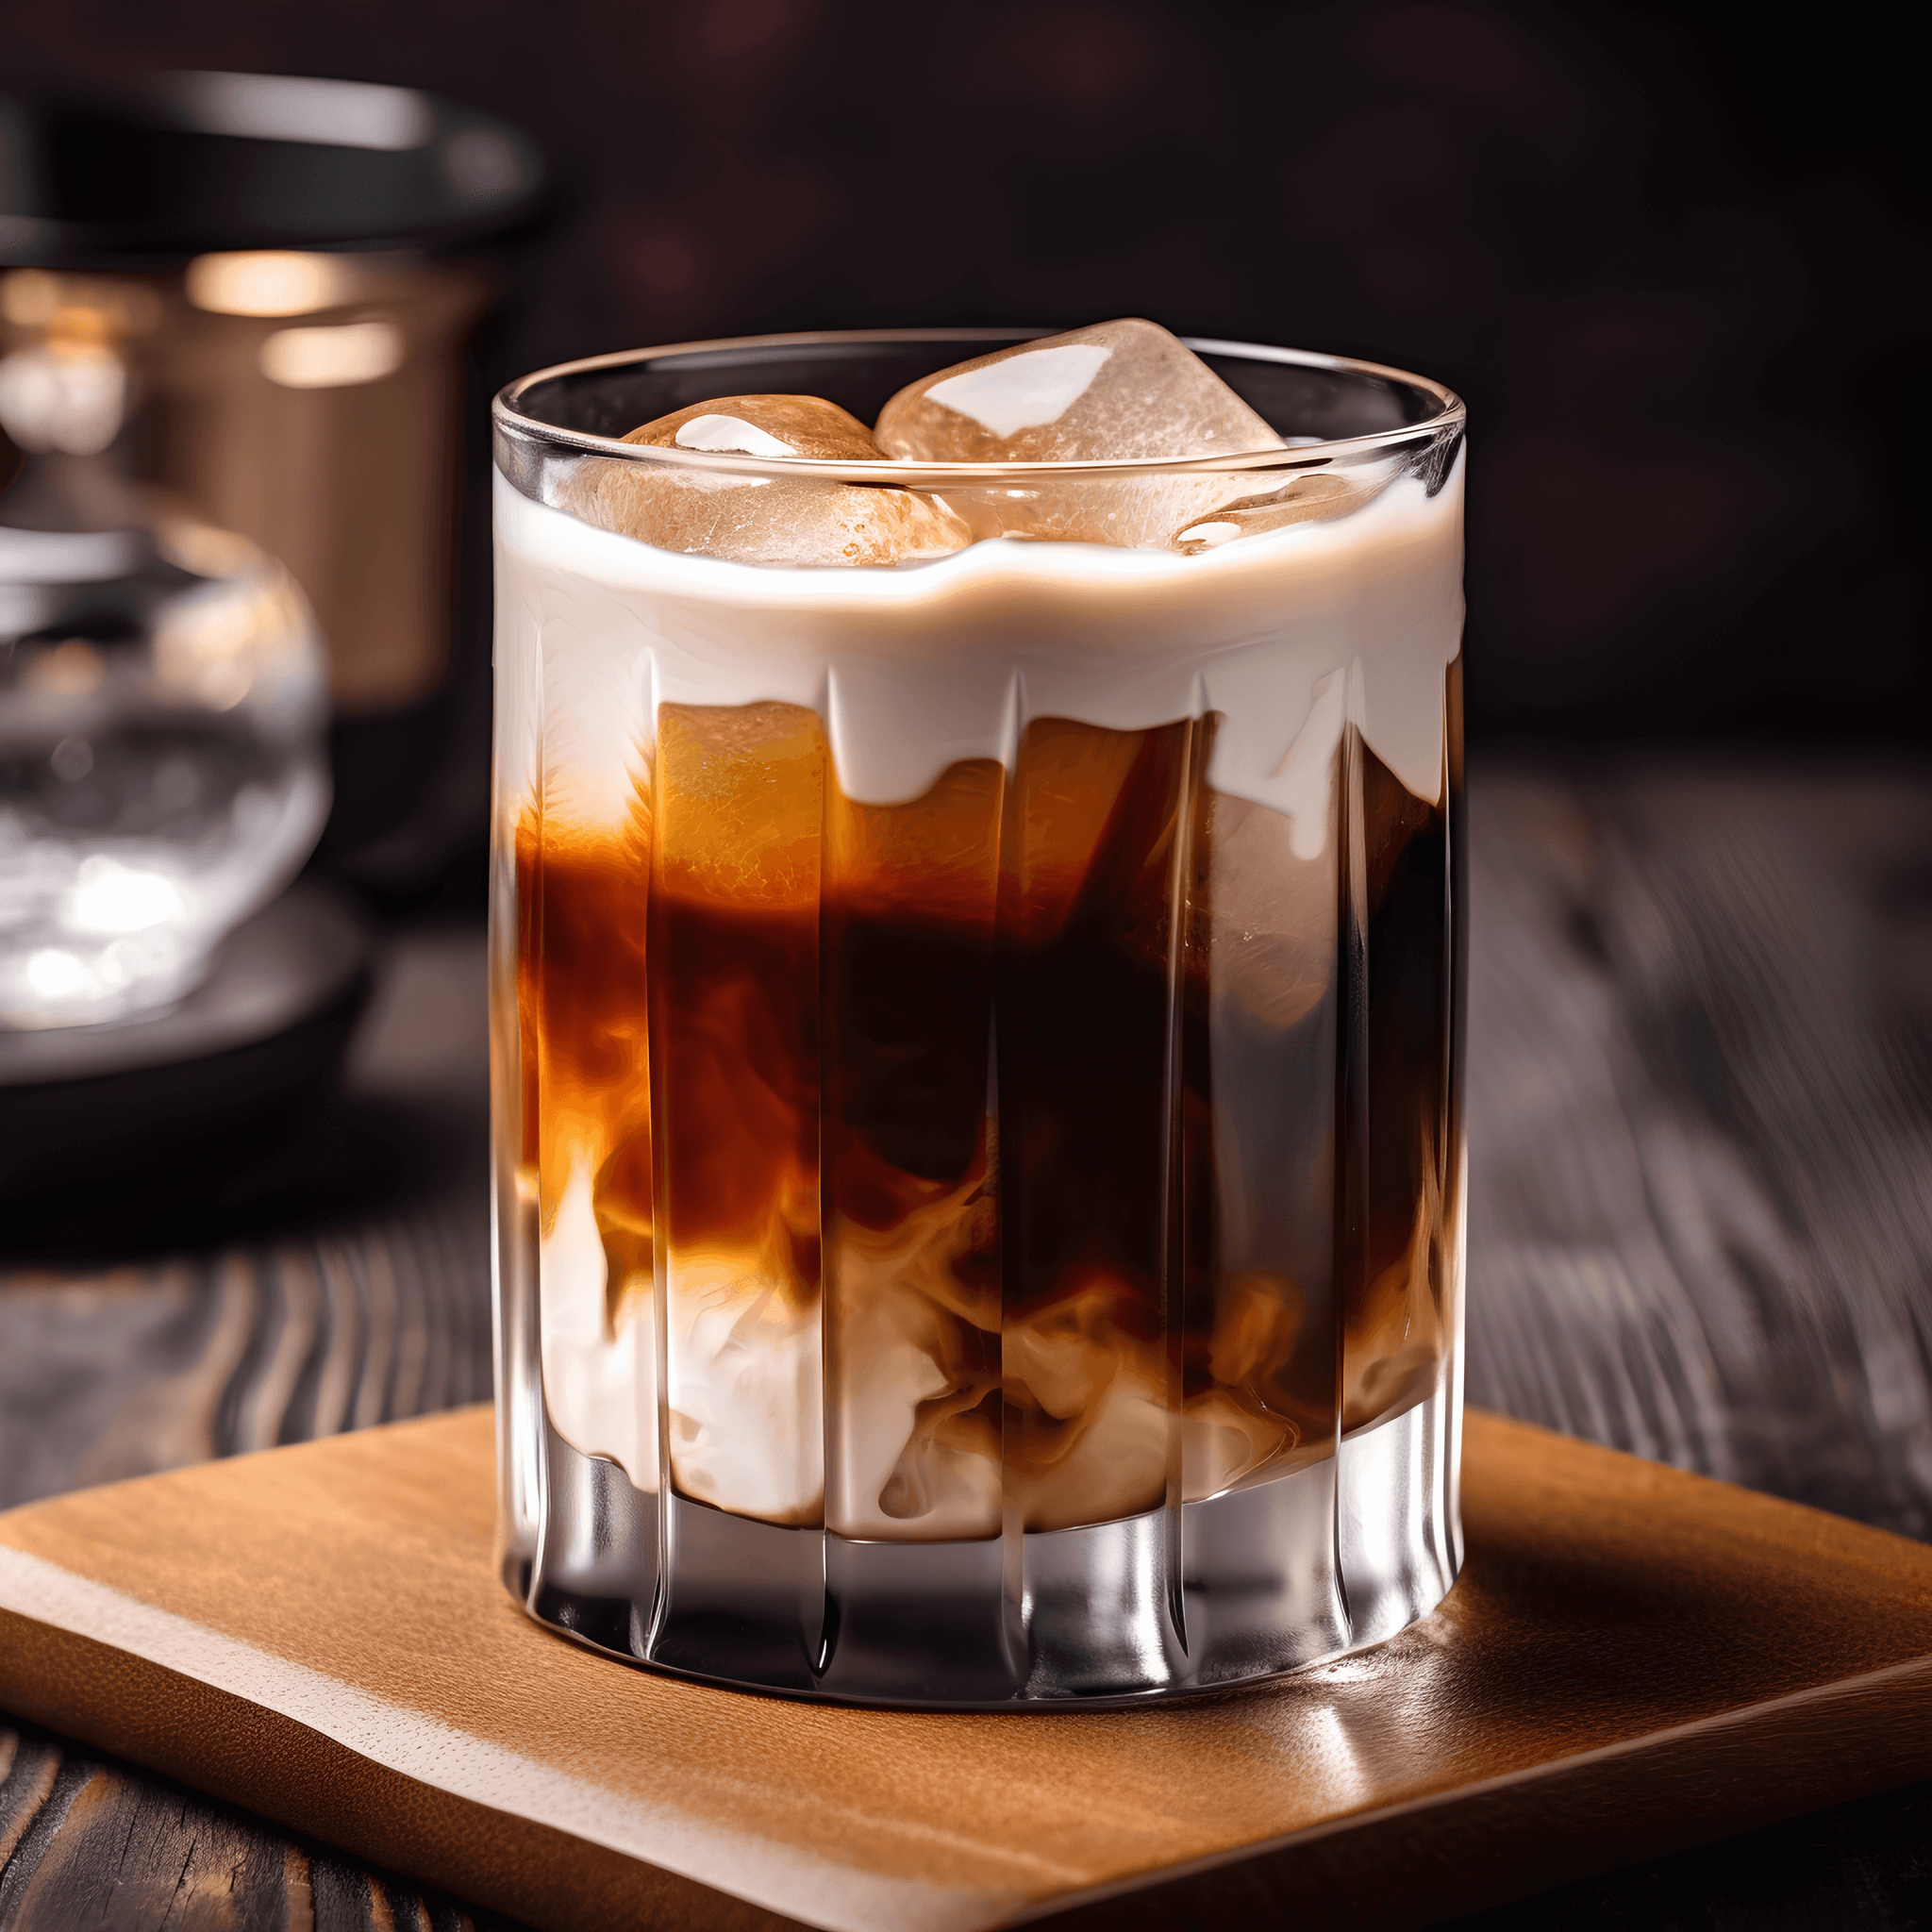 White Russian Cocktail Recipe - The White Russian is a creamy, sweet, and slightly strong cocktail. The combination of vodka, coffee liqueur, and cream creates a rich and indulgent flavor profile that is both comforting and satisfying.